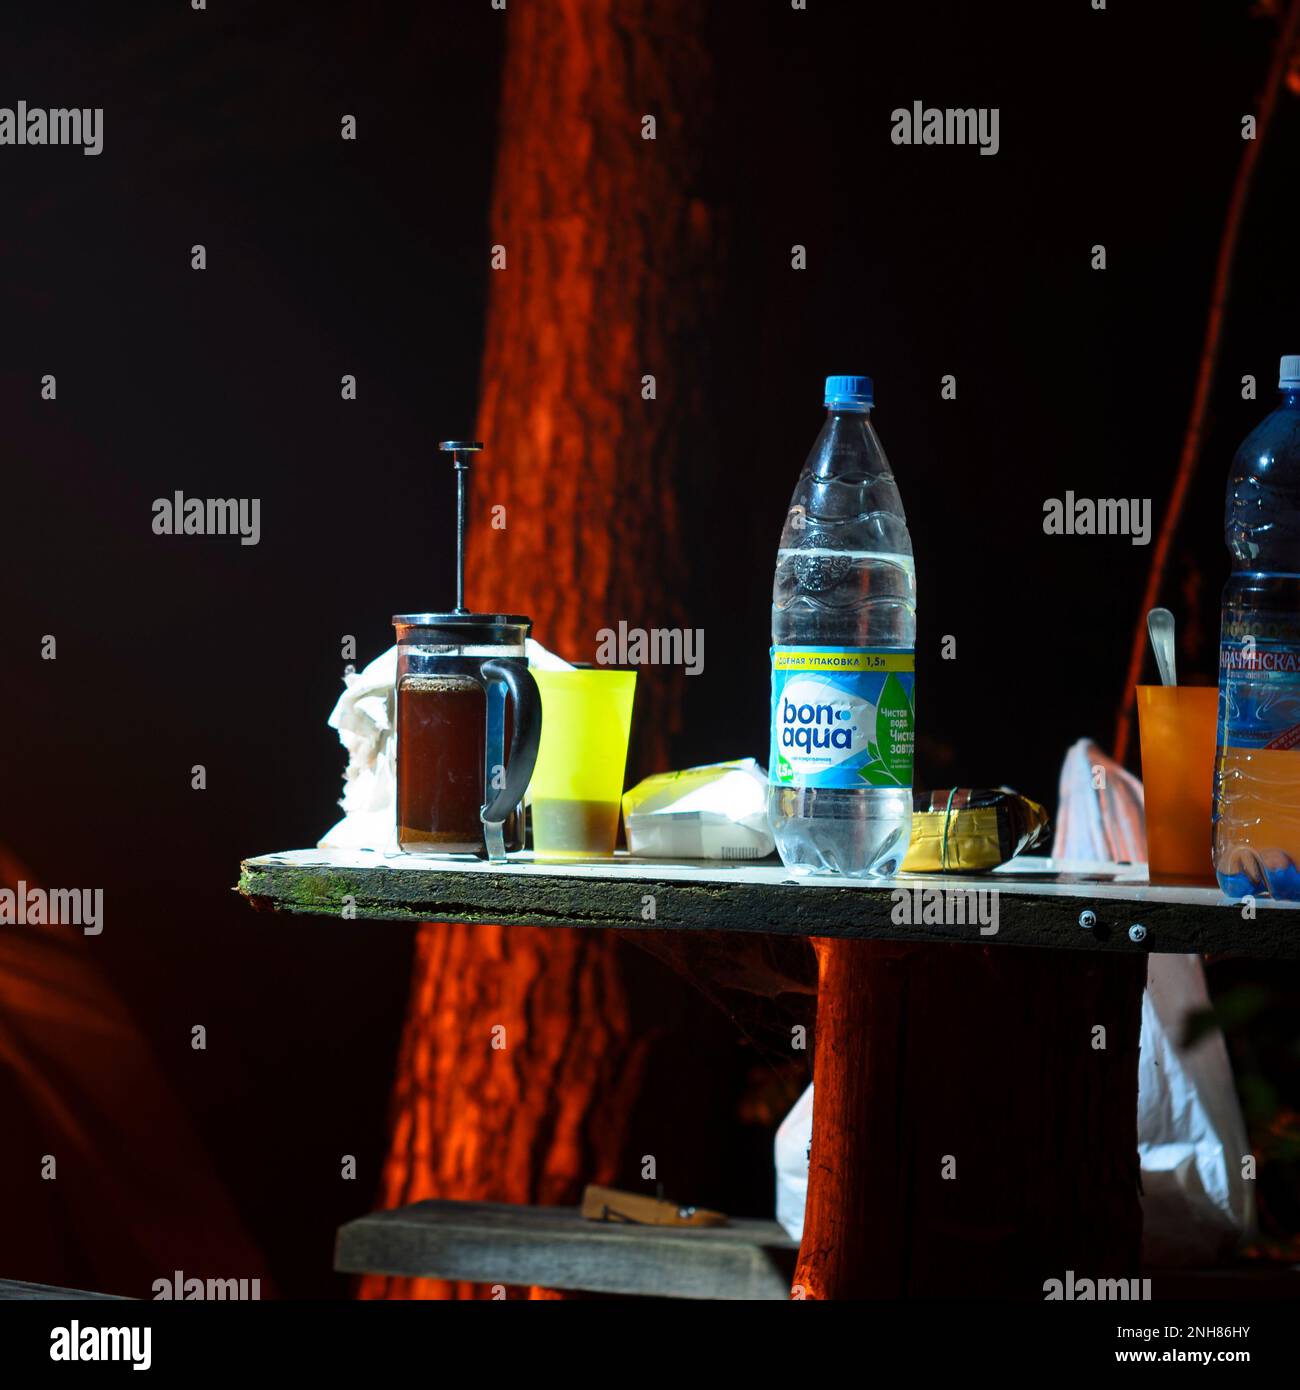 water bottle of 'BonAqua' mineral 'Karachinskaya' are on the table at night with coffee in a mug and French press around the campfire Stock Photo